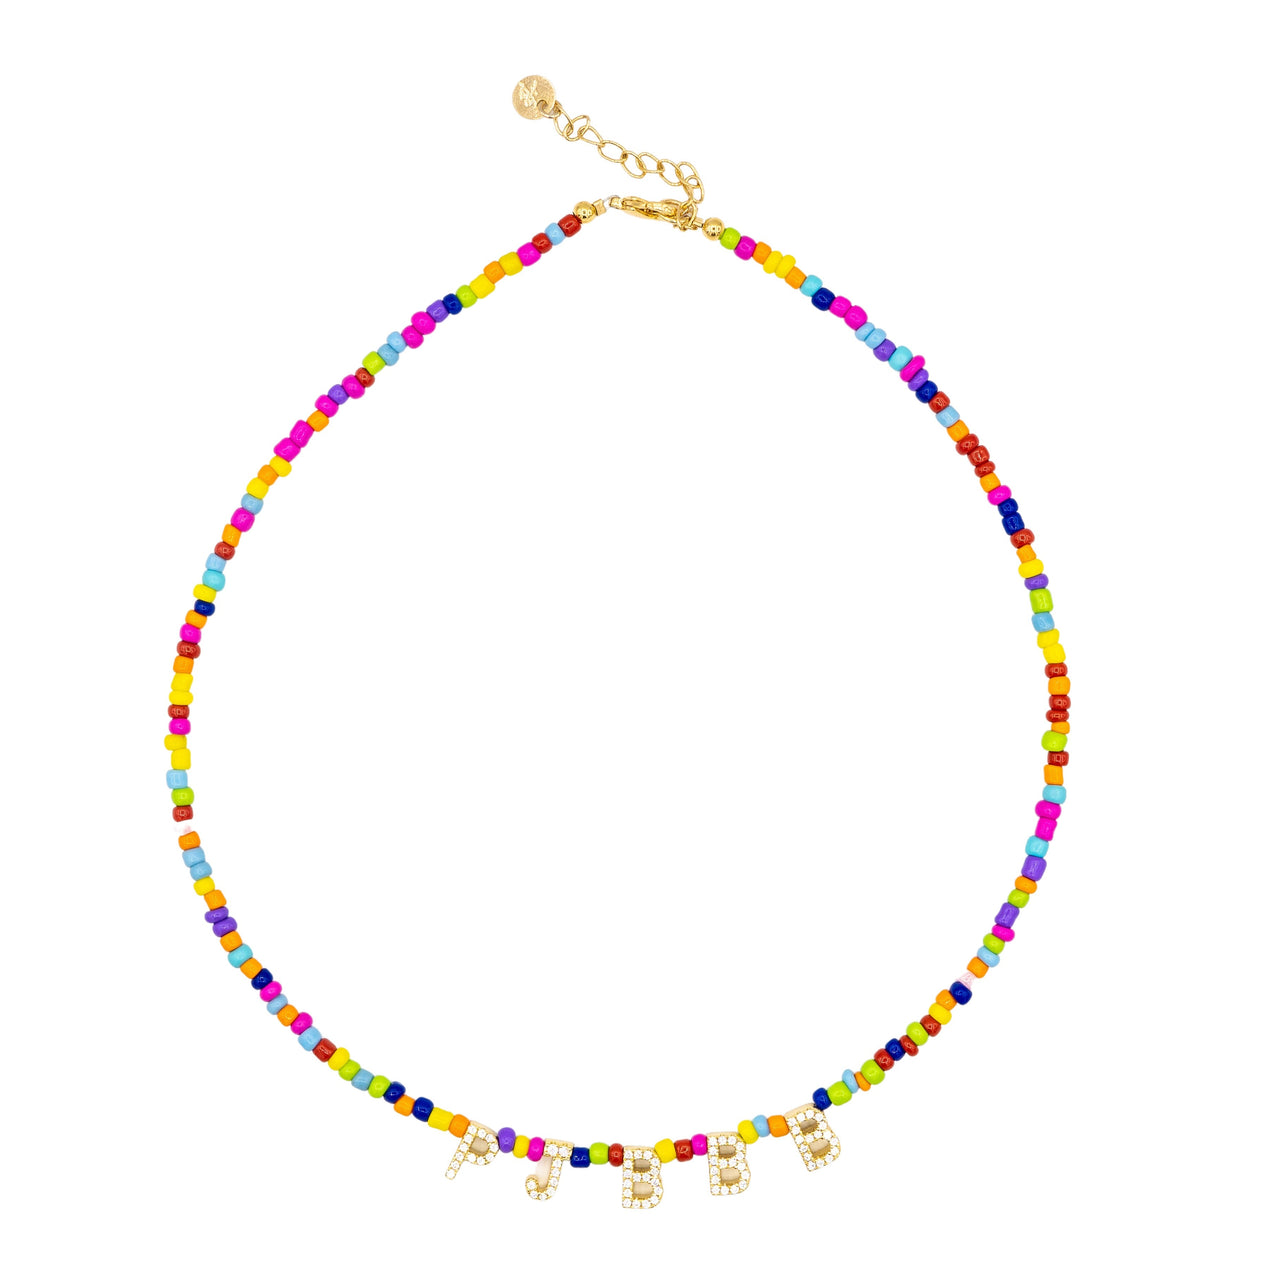 The Colorful Beaded Letter Necklace